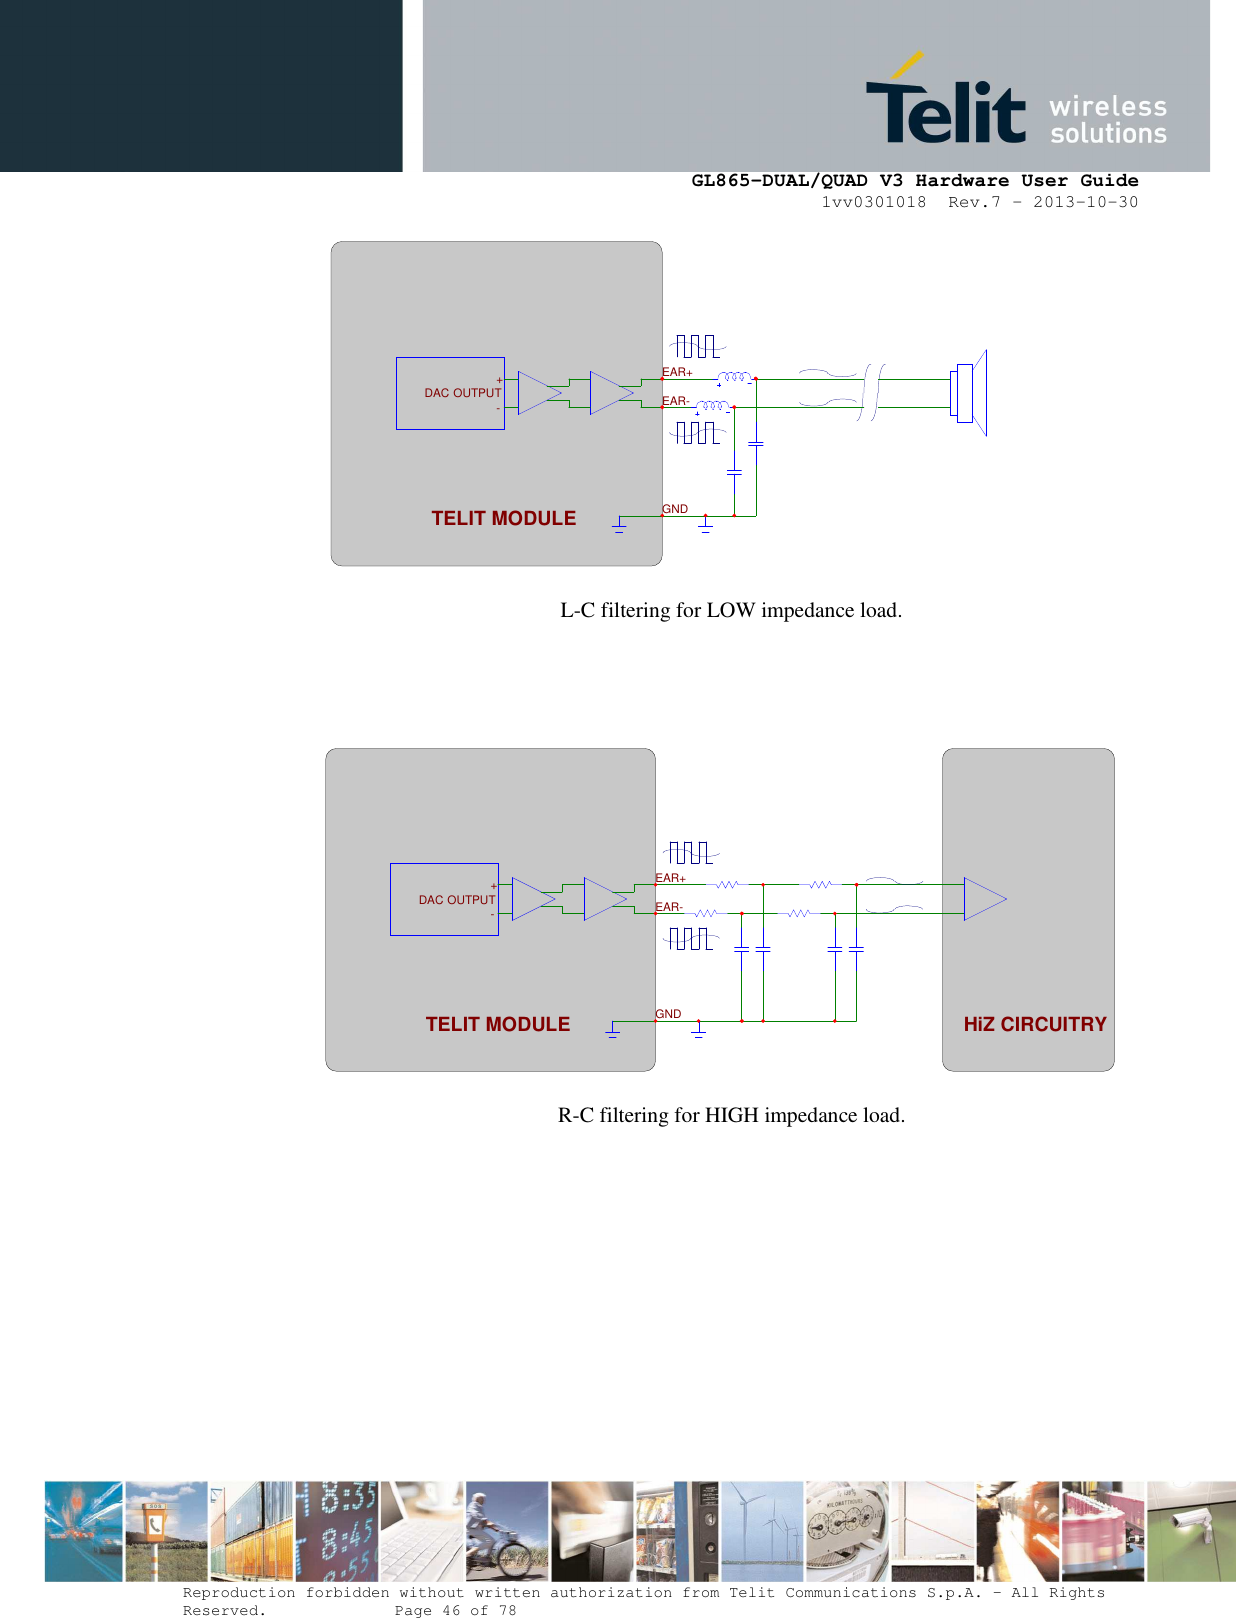      GL865-DUAL/QUAD V3 Hardware User Guide 1vv0301018  Rev.7 – 2013-10-30  Reproduction forbidden without written authorization from Telit Communications S.p.A. - All Rights Reserved.    Page 46 of 78 Mod. 0805 2011-07 Rev.2     L-C filtering for LOW impedance load.        R-C filtering for HIGH impedance load. EAR+EAR-TELIT MODULE-+ OUTPUTDACGNDEAR+ EAR- TELIT MODULE-+OUTPUTDACGND HiZ CIRCUITRY